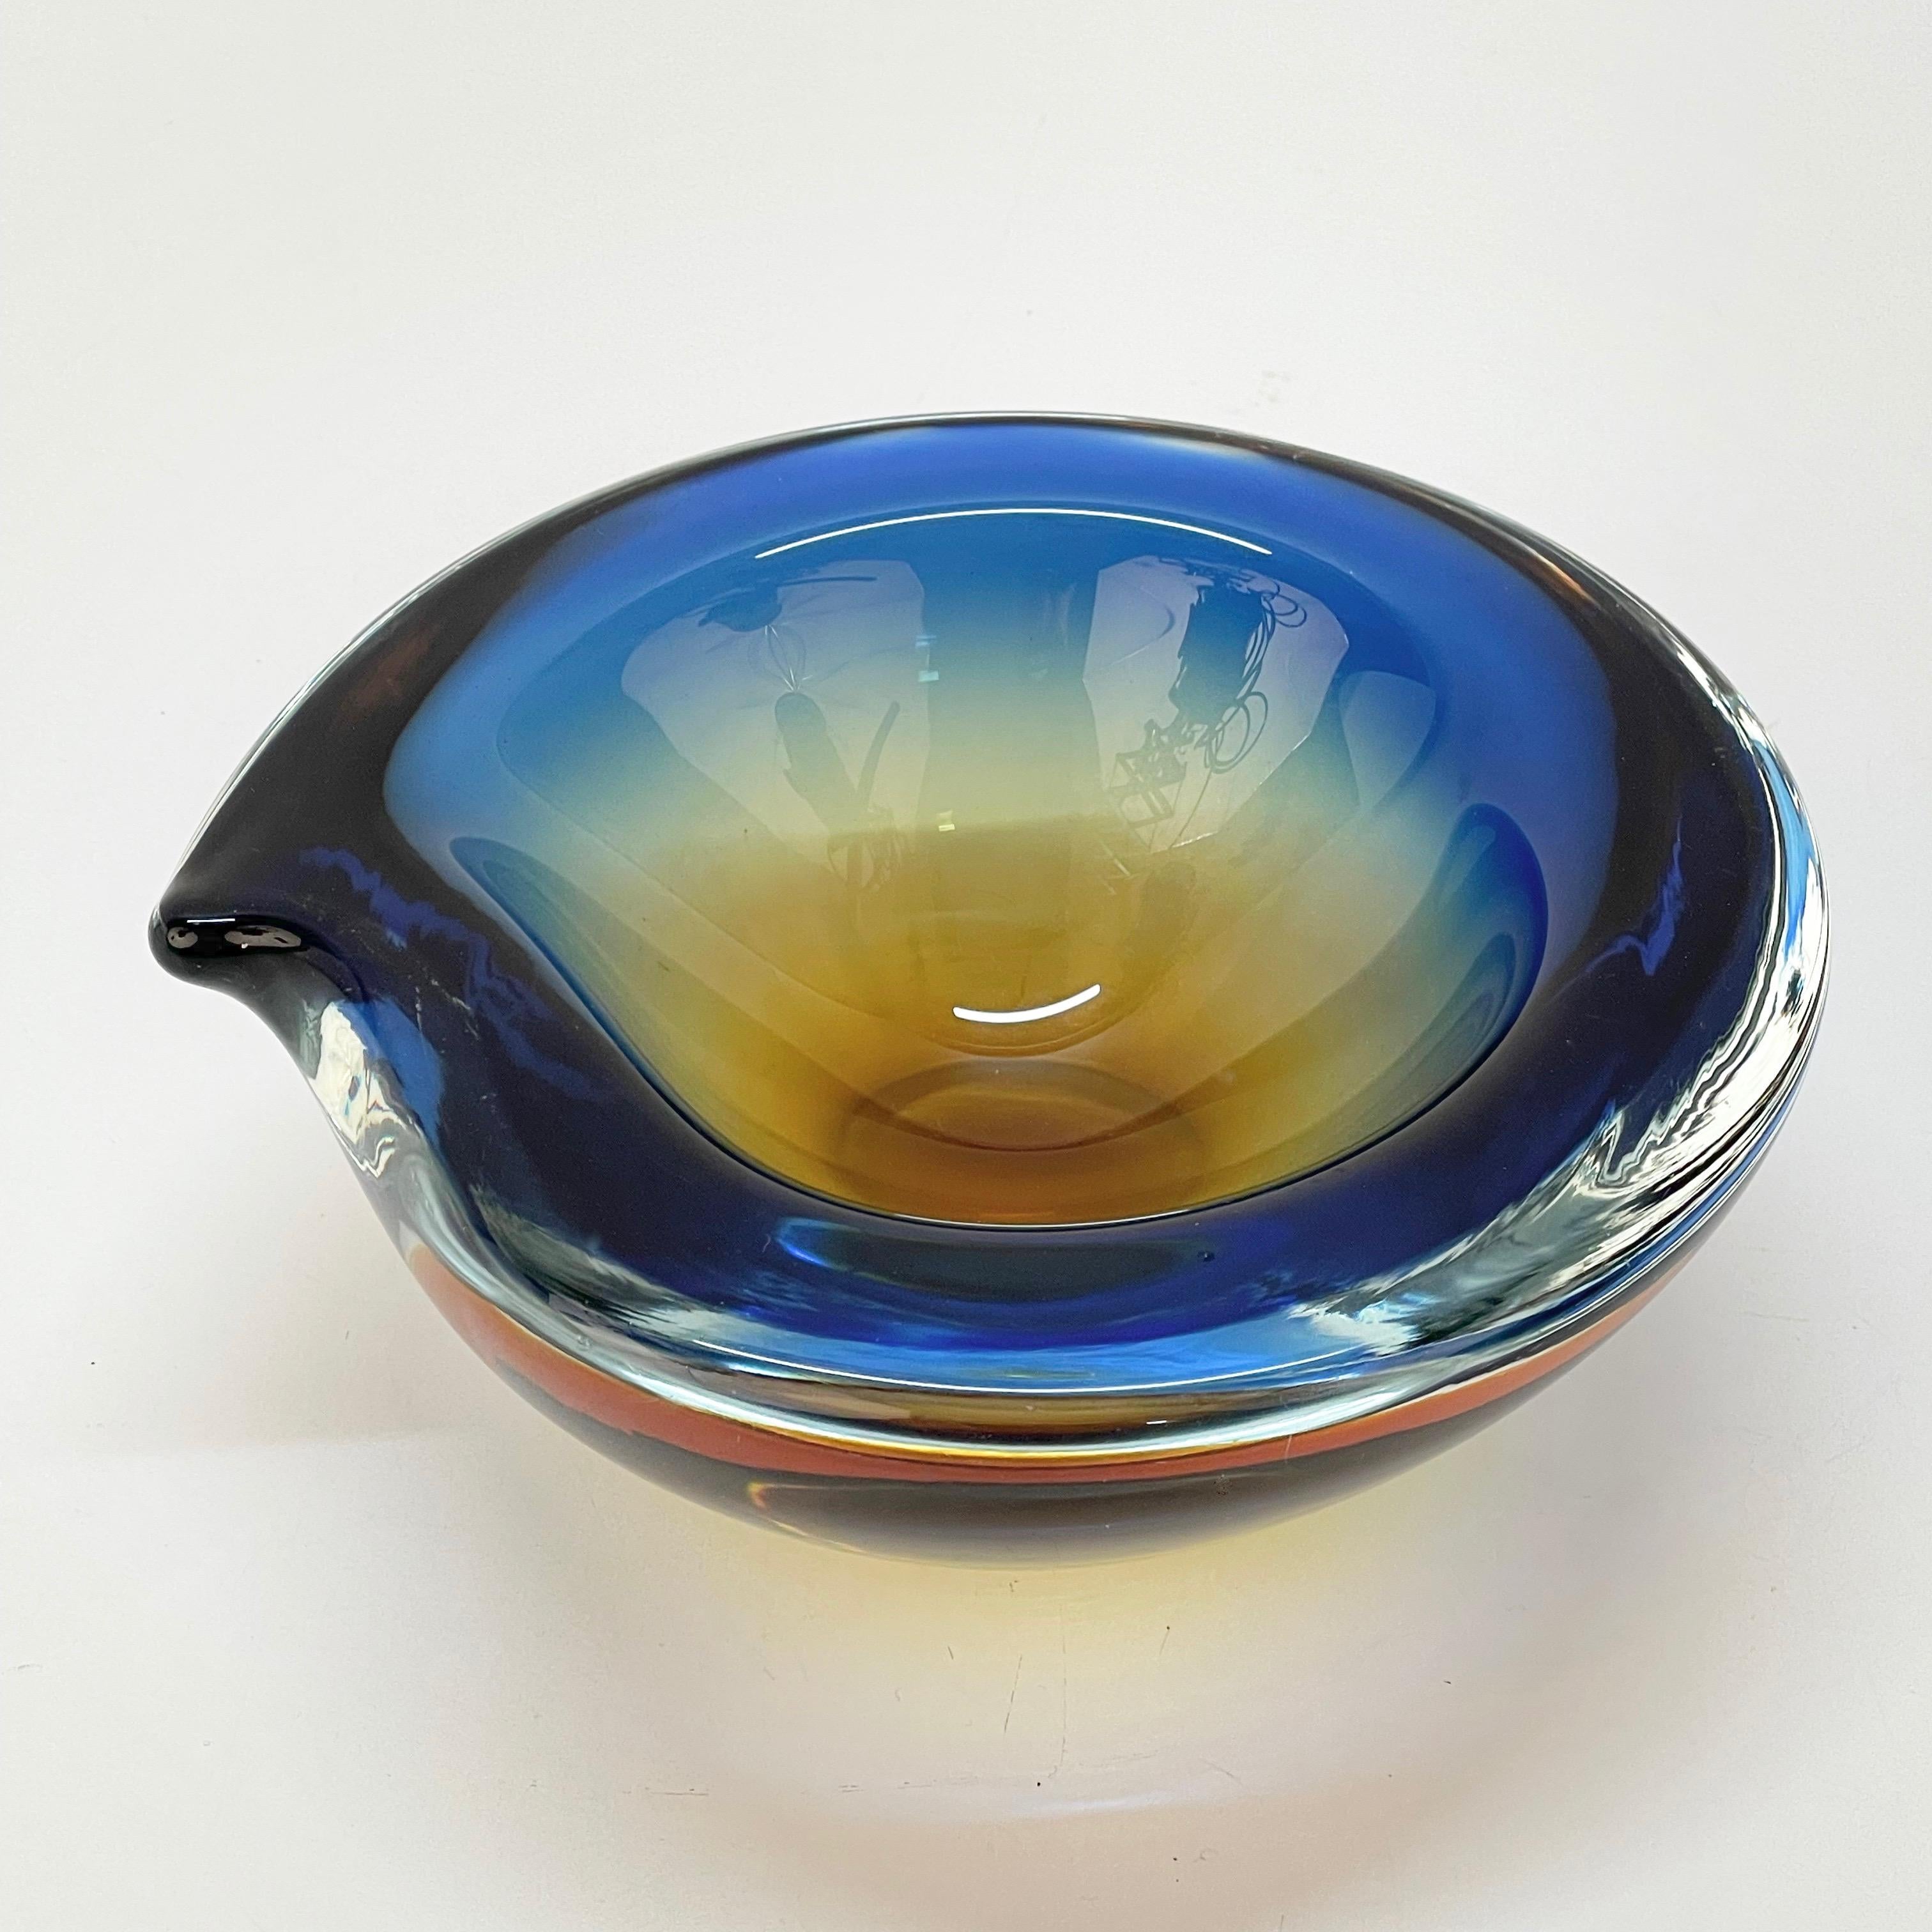 Murano Ashtray or Bowl, Flavio Poli Submerged Glass Amber Blue, Italy, 1960 For Sale 5